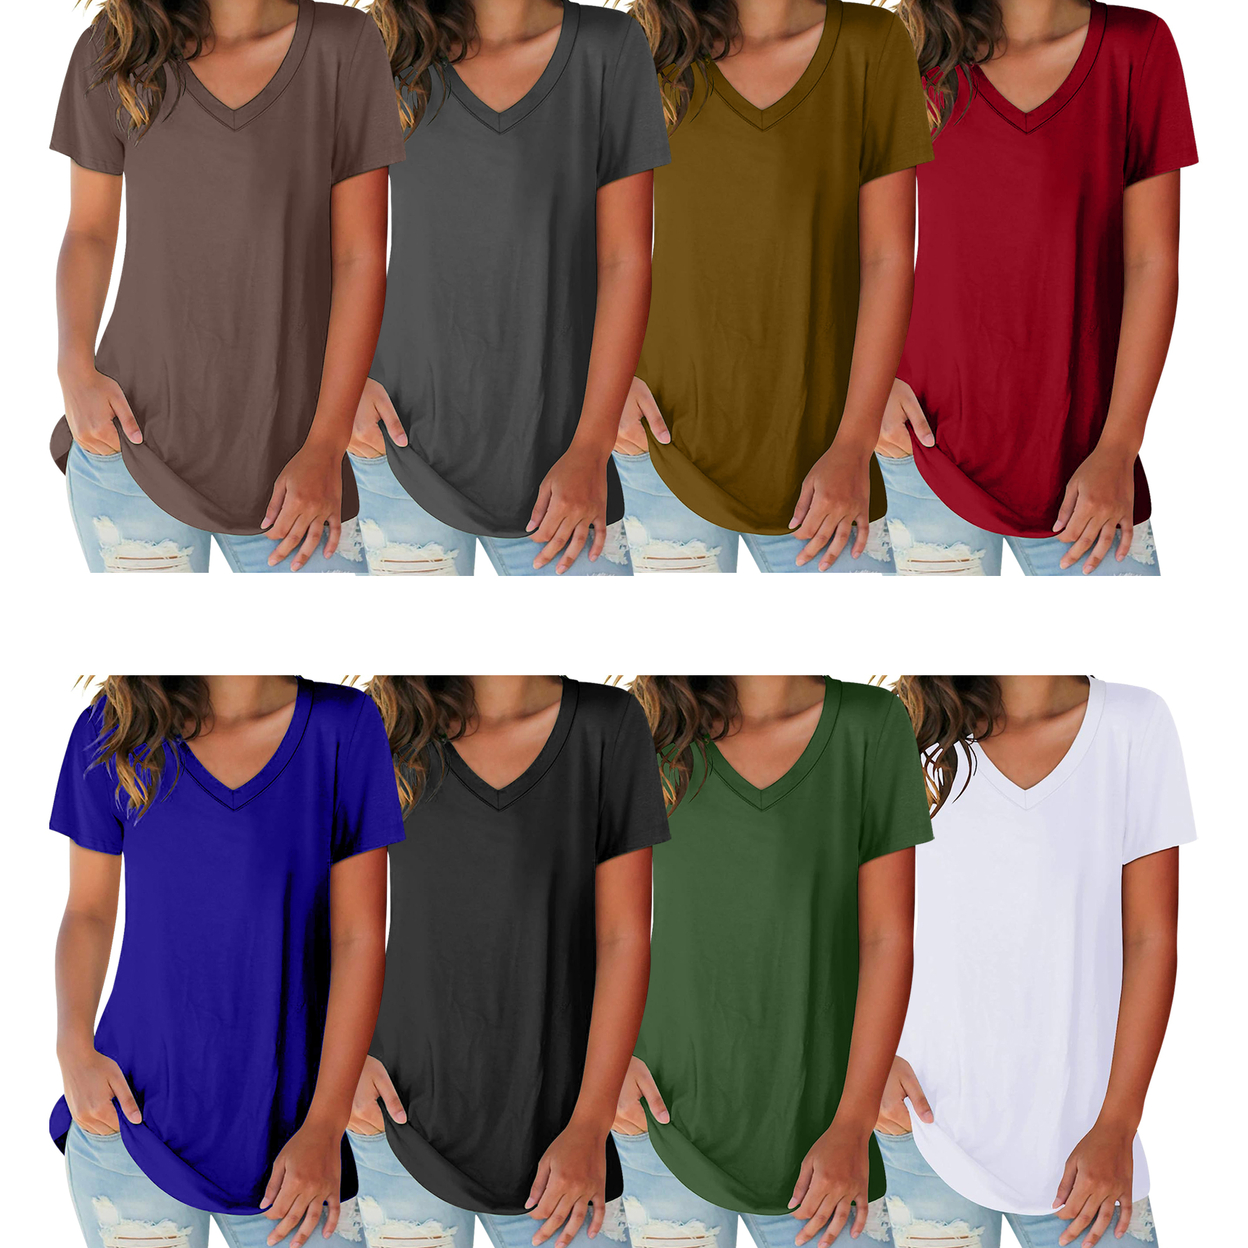 2-Pack: Women's Ultra Soft Smooth Cotton Blend Basic V-Neck Short Sleeve Shirts - Navy & Red, Small